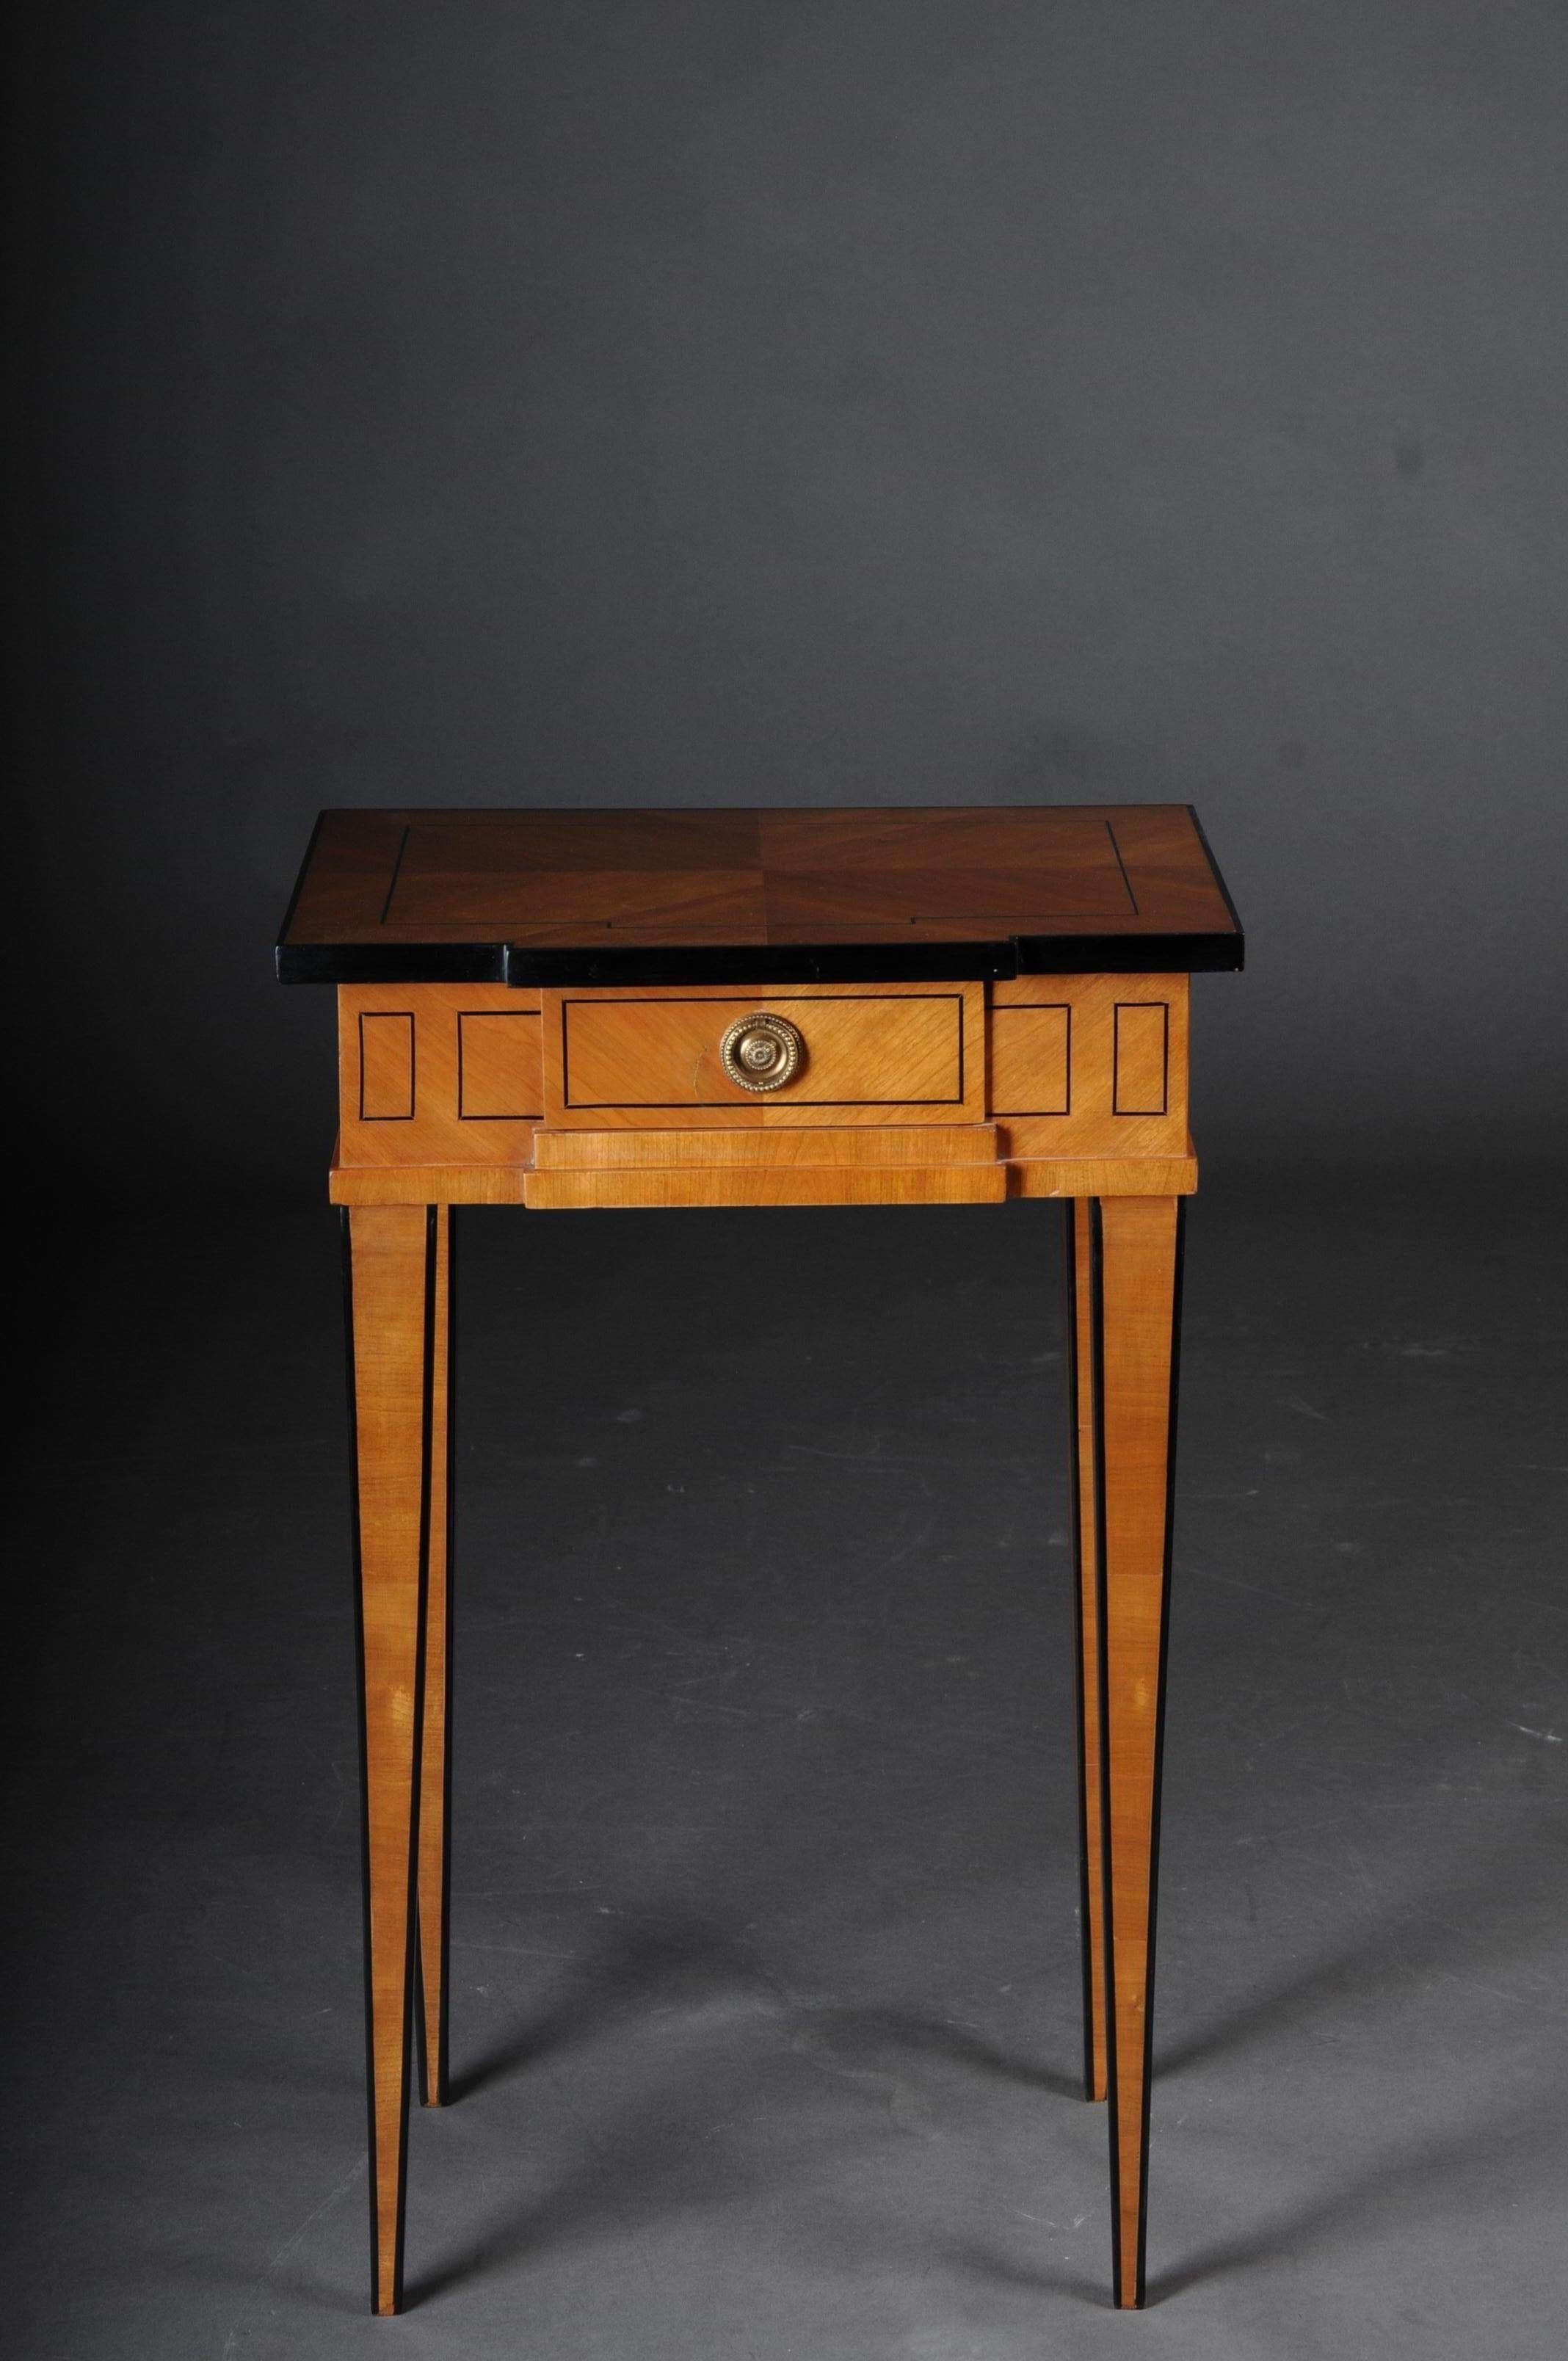 Elegant side table in classicistic style

Cherrywood veneer on fir, partially ebonized. Longitudinal rectangular sheet over a single-drawer, cut-out frame and square legs tapering downwards. Nice patina, hand polish with shellac.

(G-Sam-27).